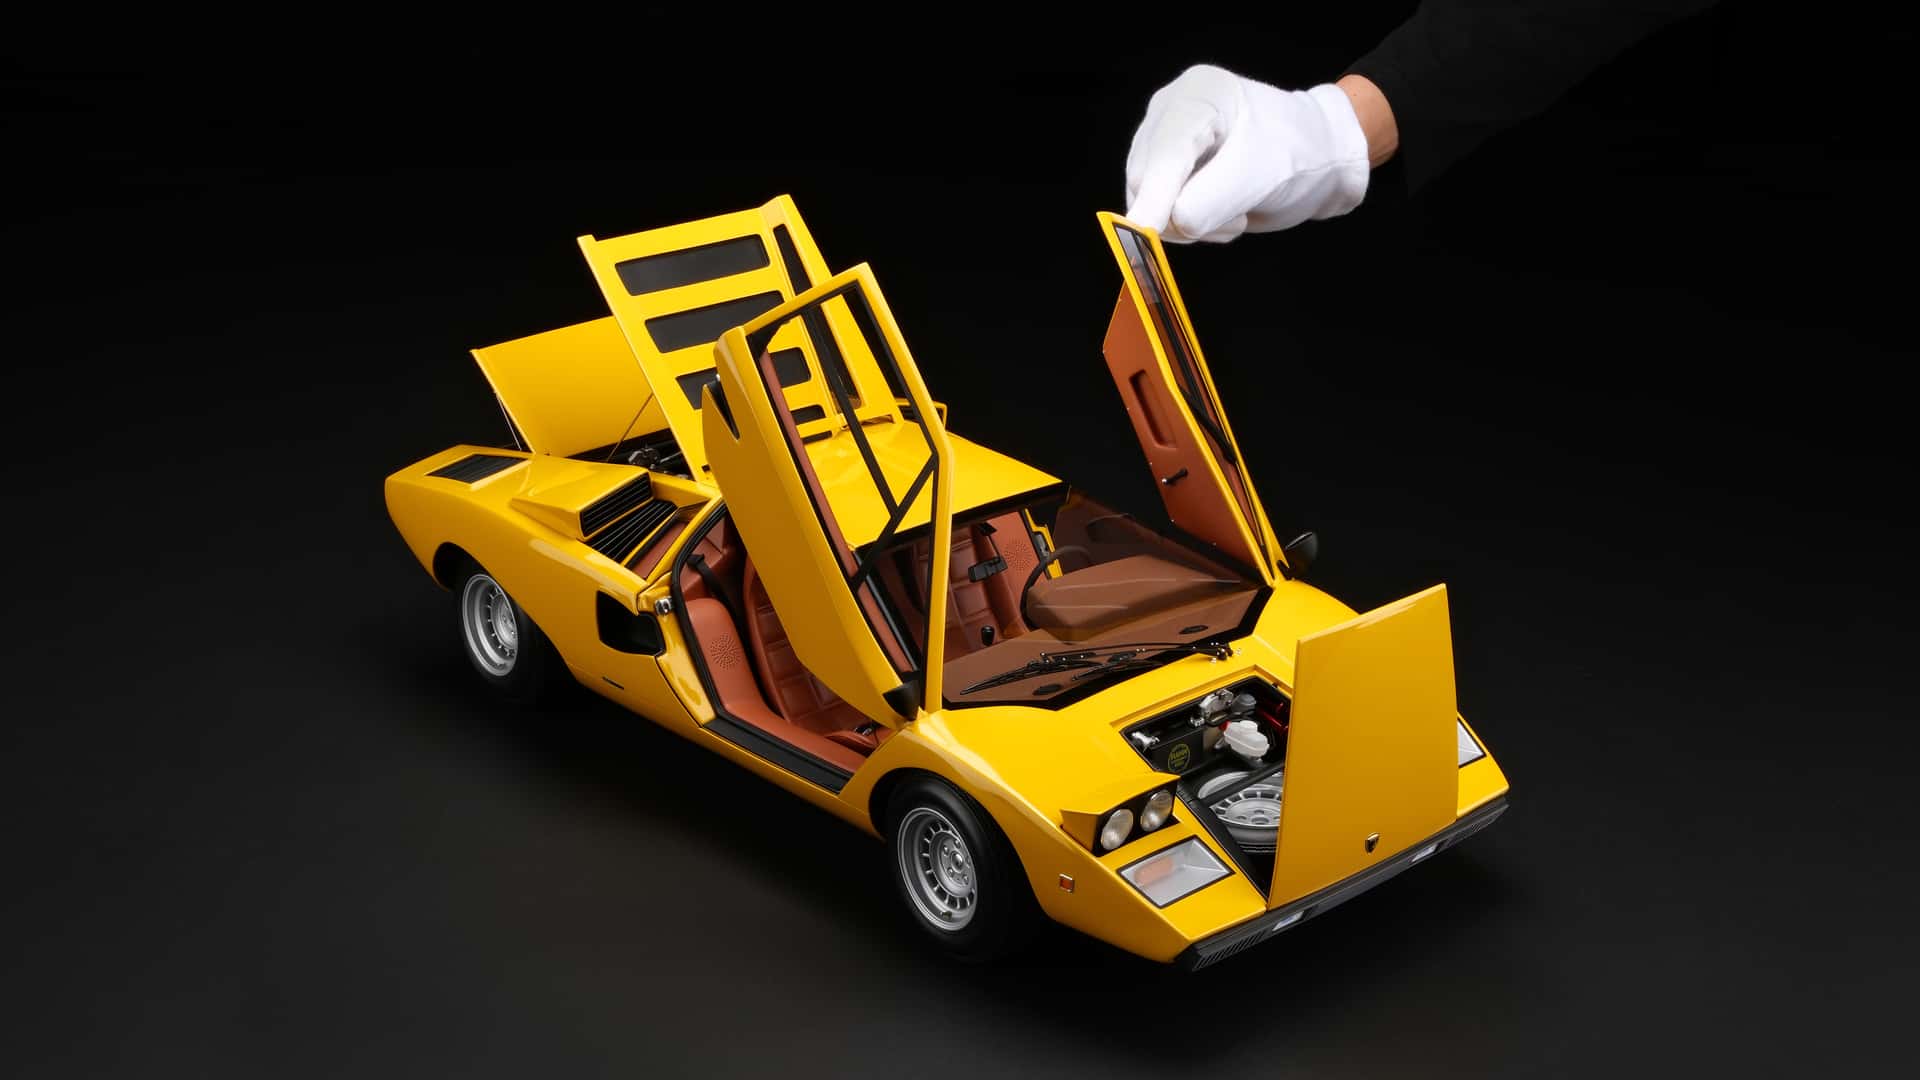 this 1:8 scale lamborghini countach costs more than a real nissan versa